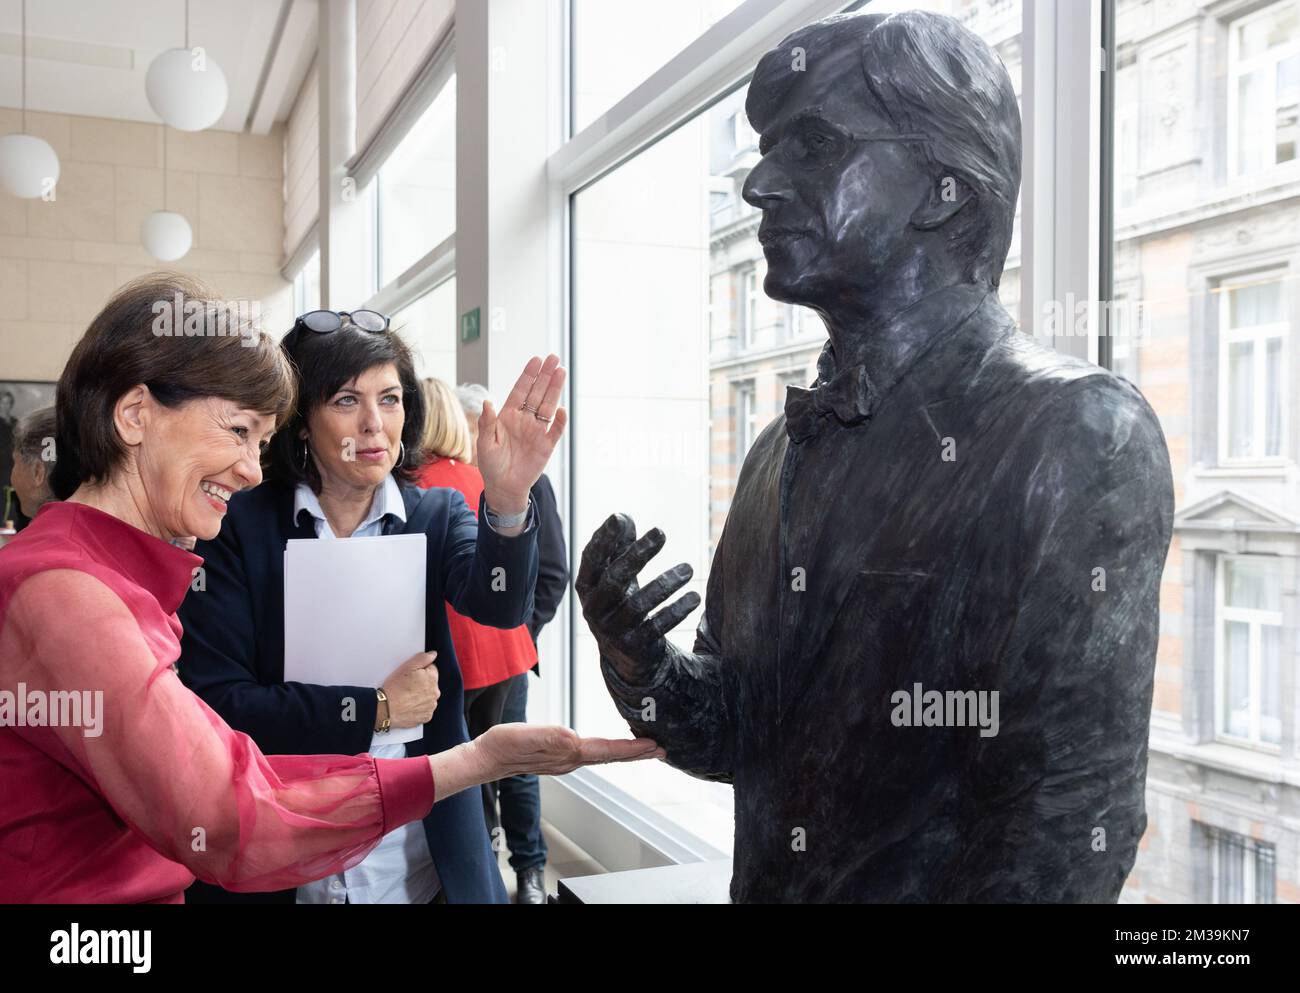 PS' Laurette Onkelinx and Joelle Milquet pictured during the inauguration of a sculpture of Walloon Minister President and former Prime Minister Elio Di Rupo, Friday 22 April 2022 at the Chamber at the Federal Parliament in Brussels. BELGA PHOTO BENOIT DOPPAGNE Stock Photo